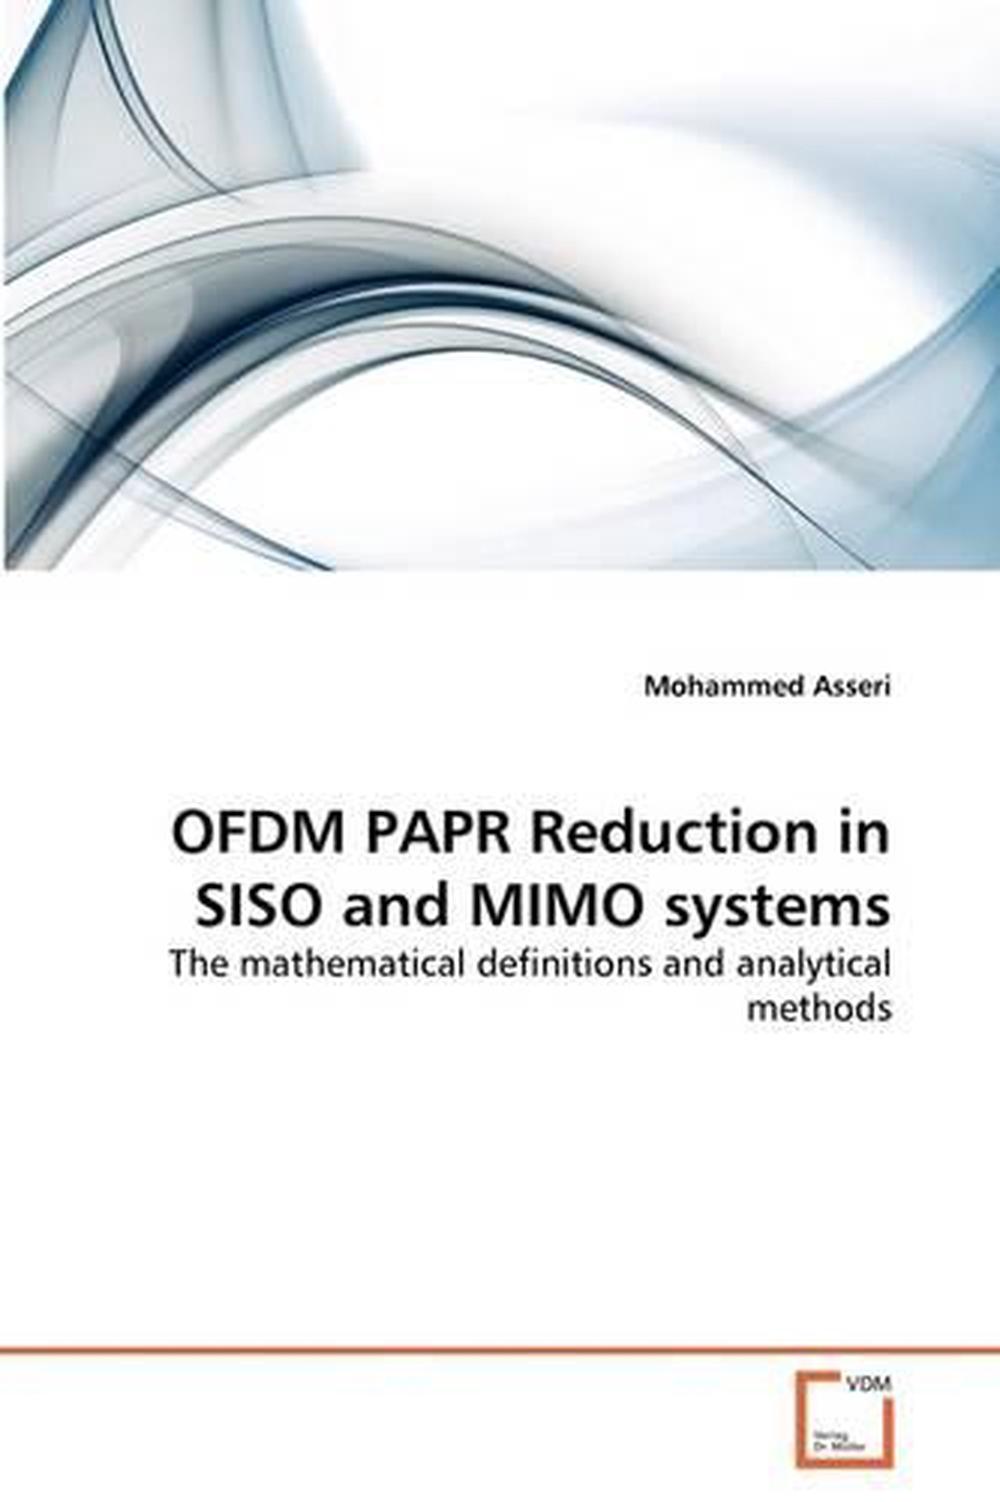 Ofdm Papr Reduction in Siso and Mimo Systems: The mathematical definitions and a - Bild 1 von 1